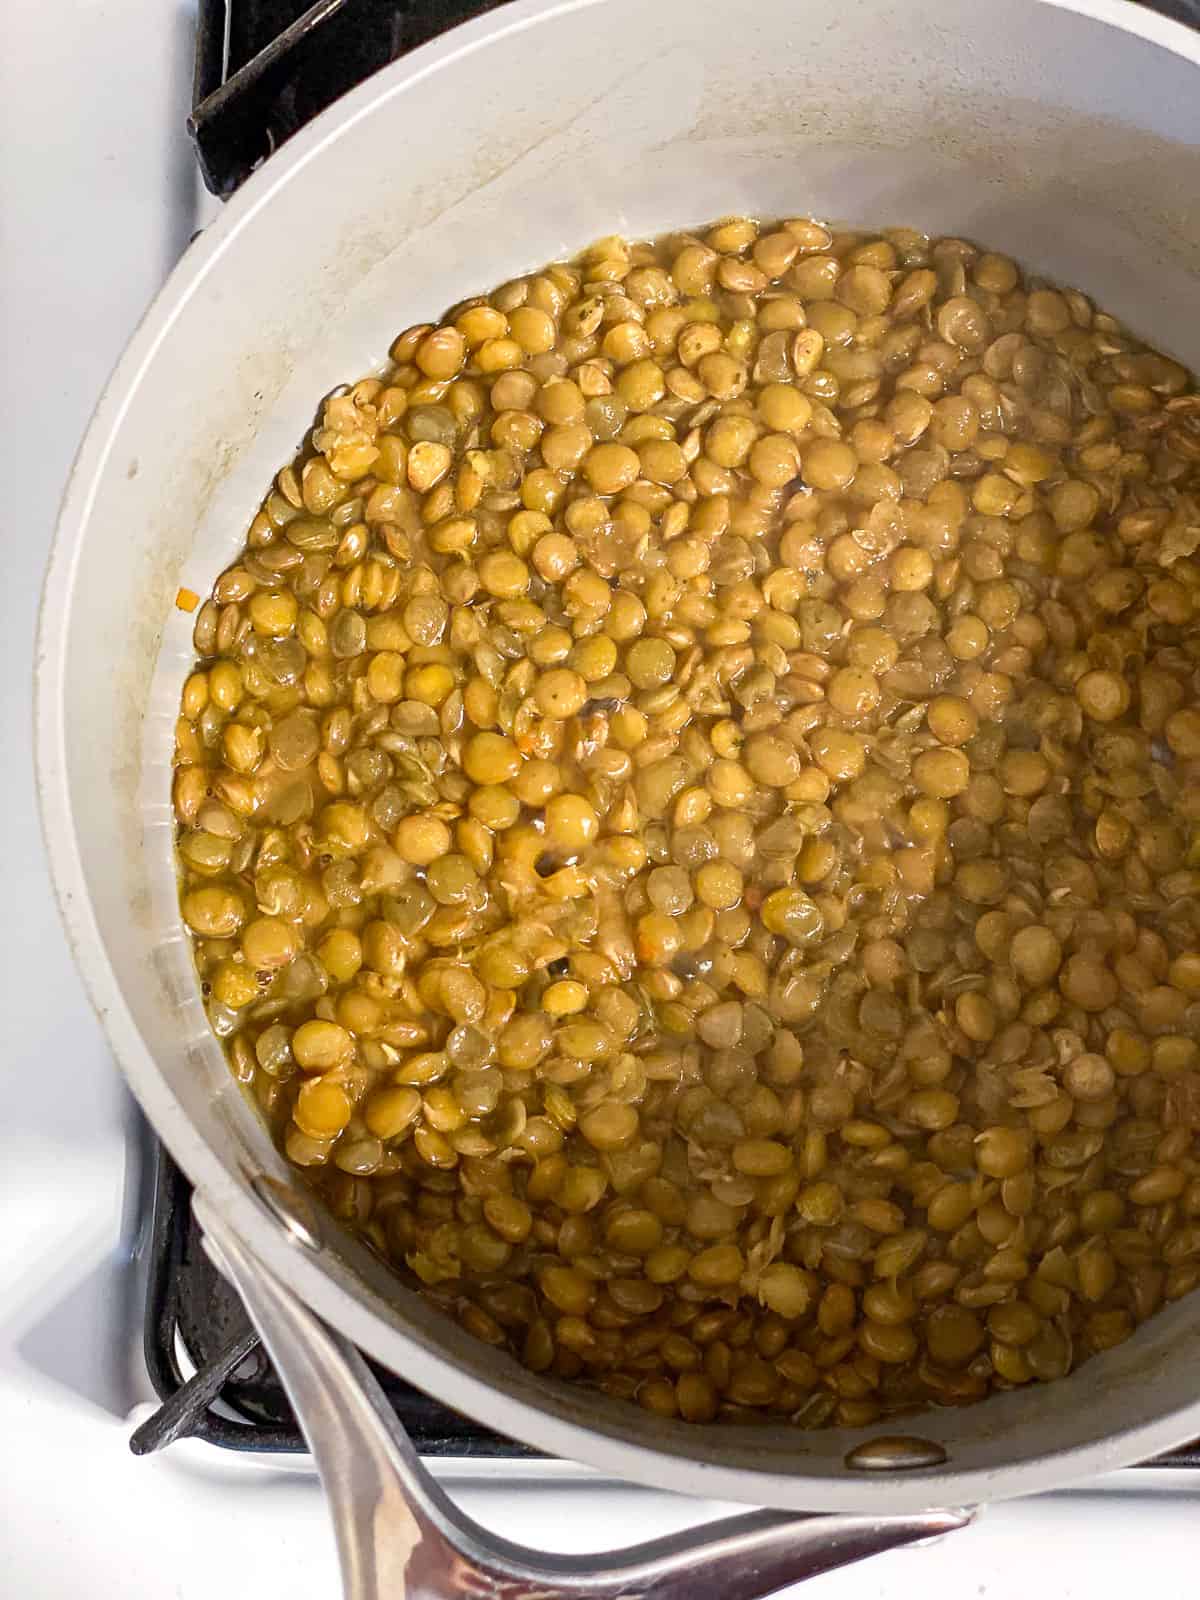 process s،t of lentils cooking in ،